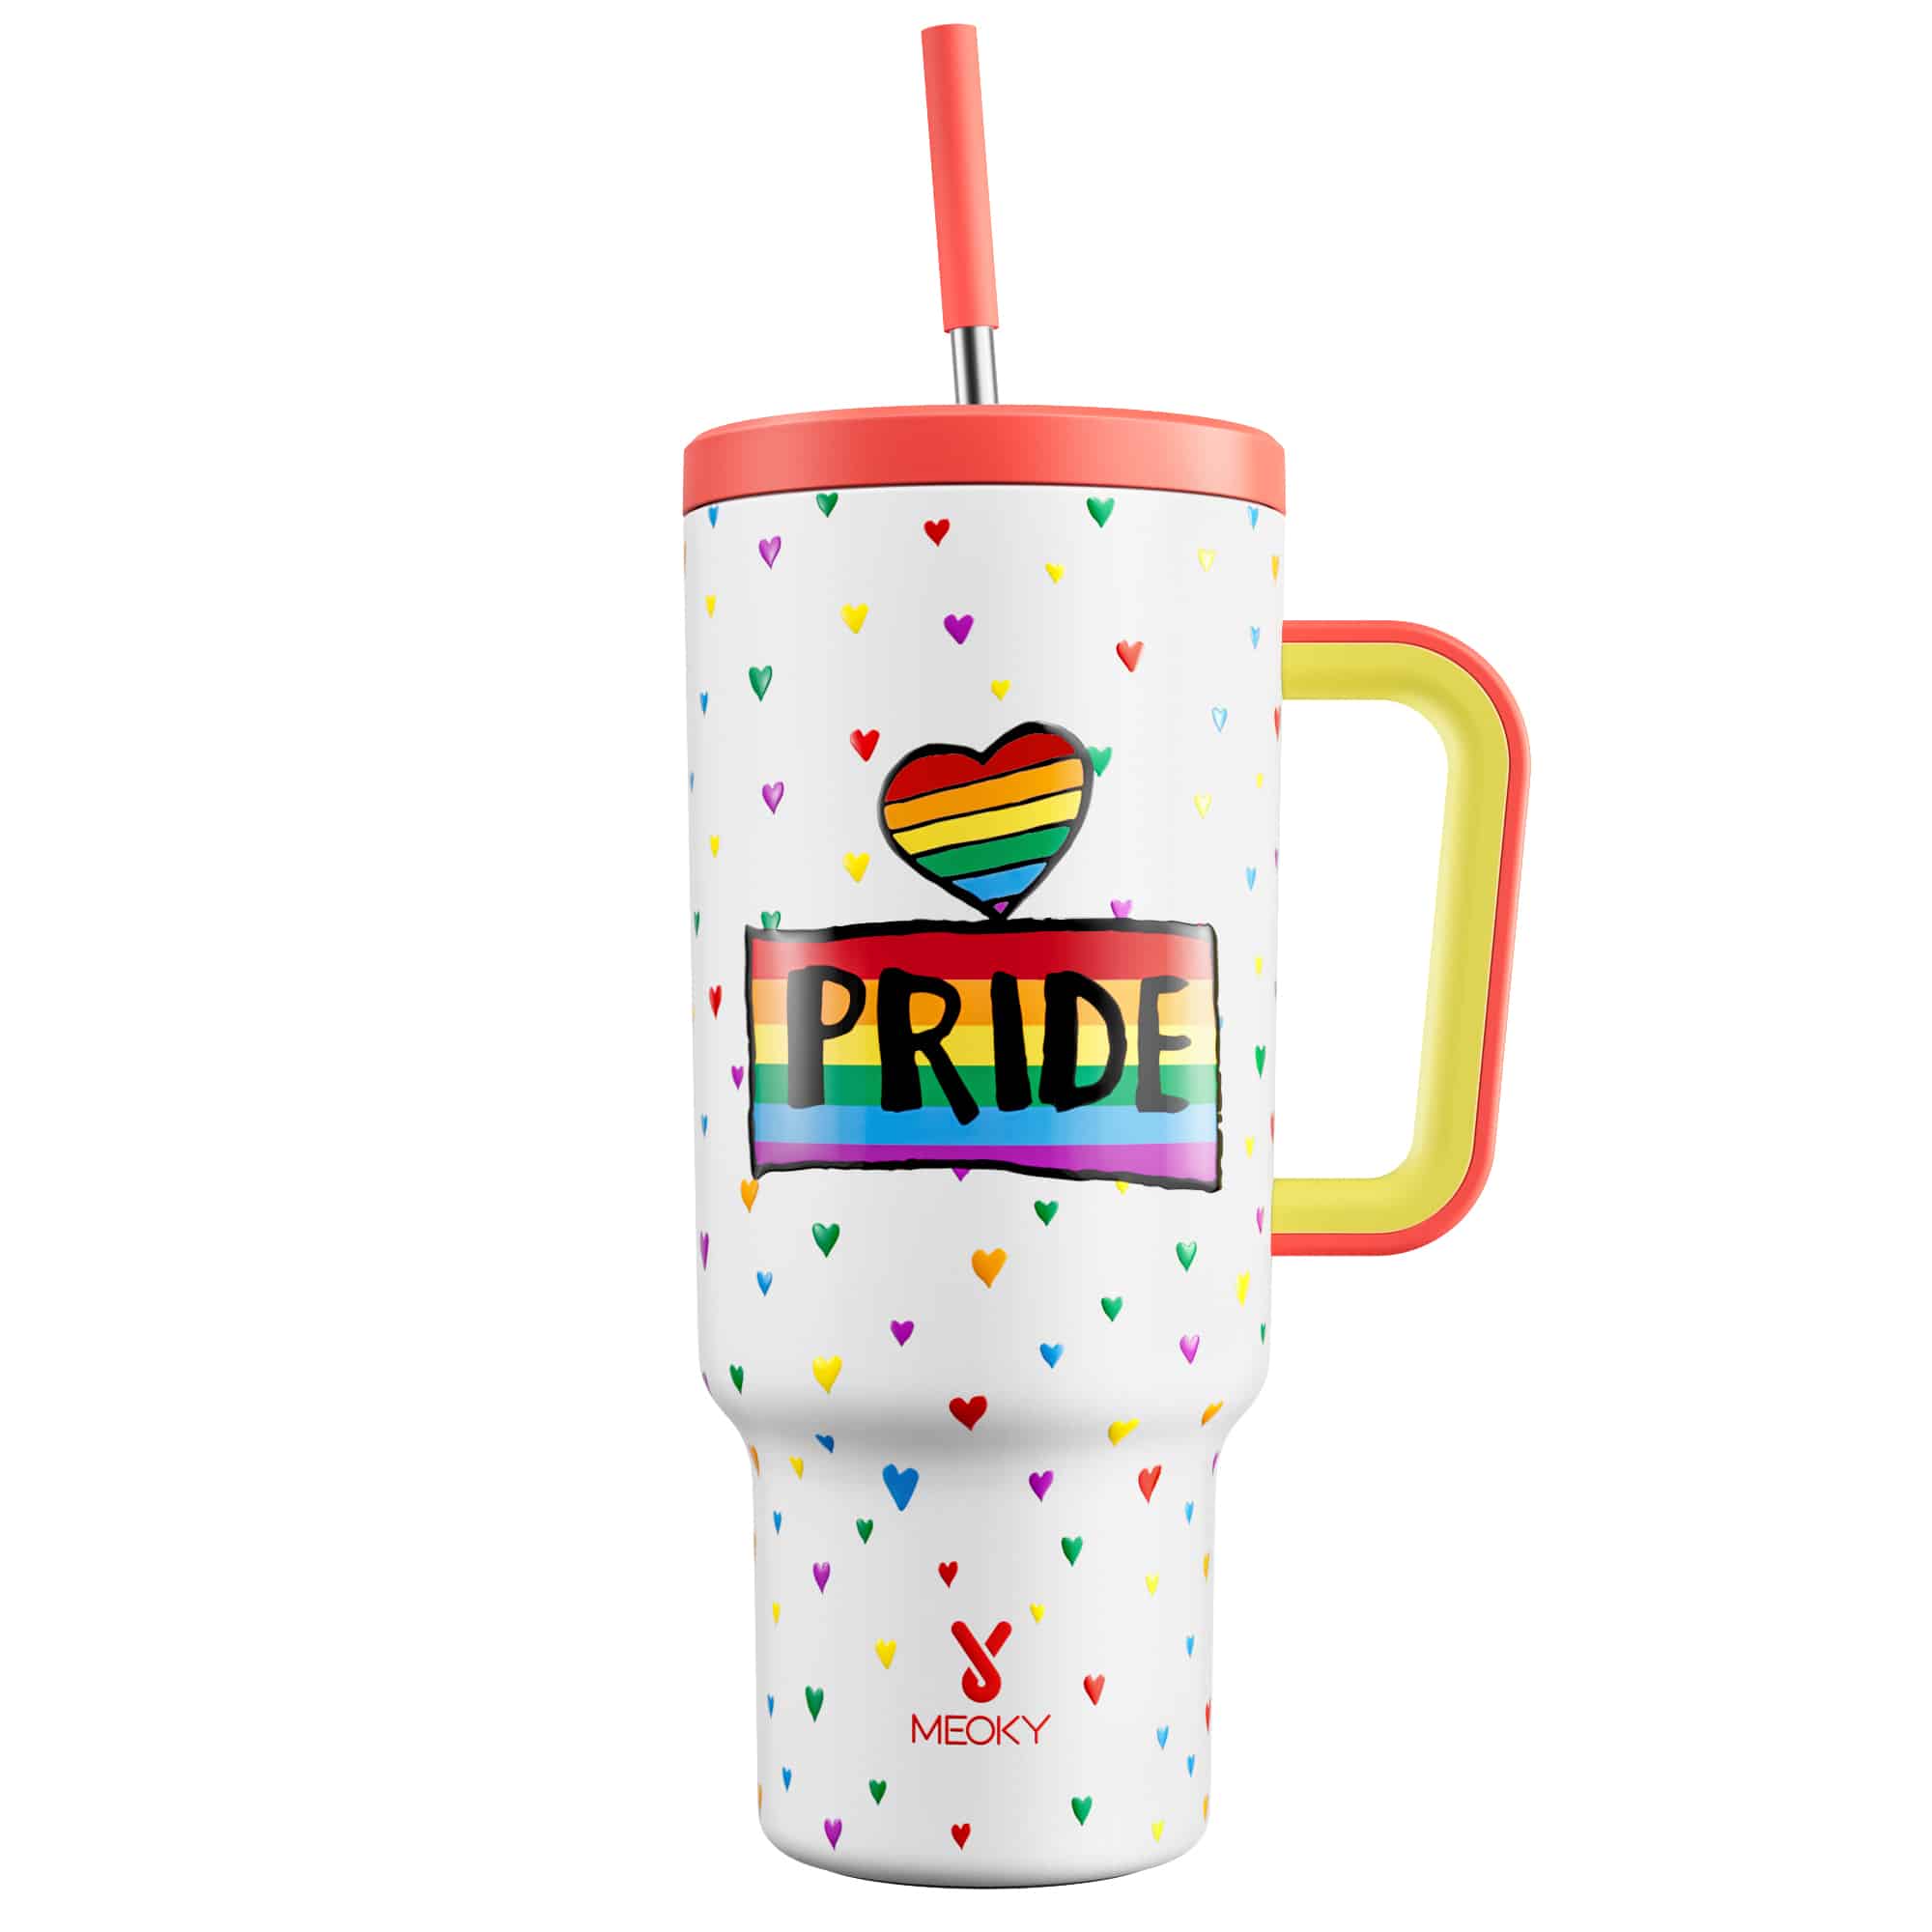 Meoky 40oz Tumbler with Handle and Straw Lid -PrideHeart